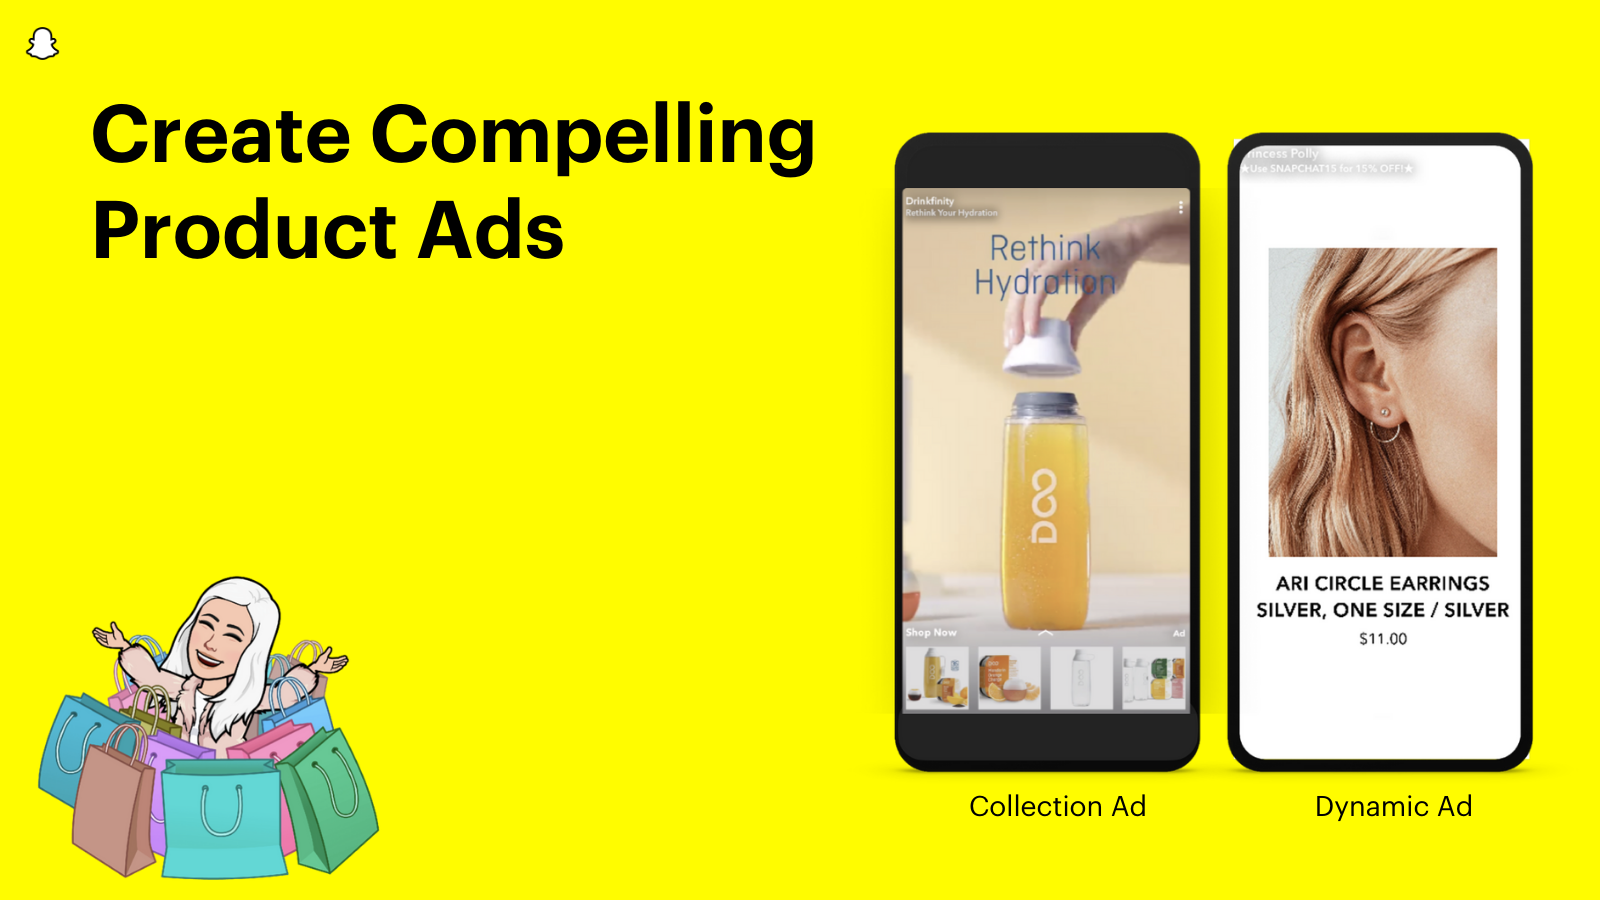 Create compelling product ads using Shopify products